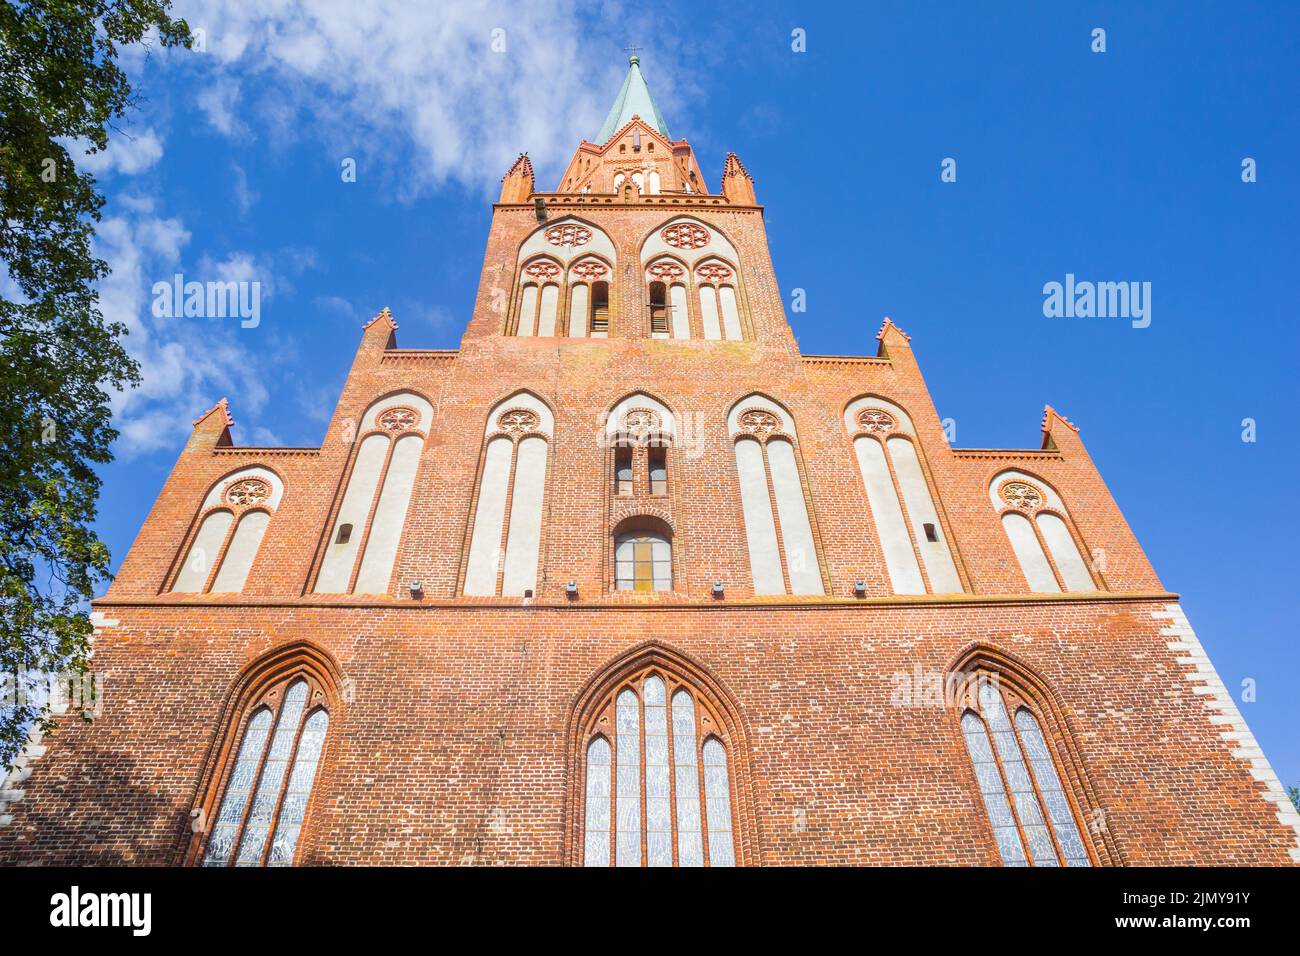 Front facade of the historic Mary Church in Trzebiatow, Poland Stock Photo